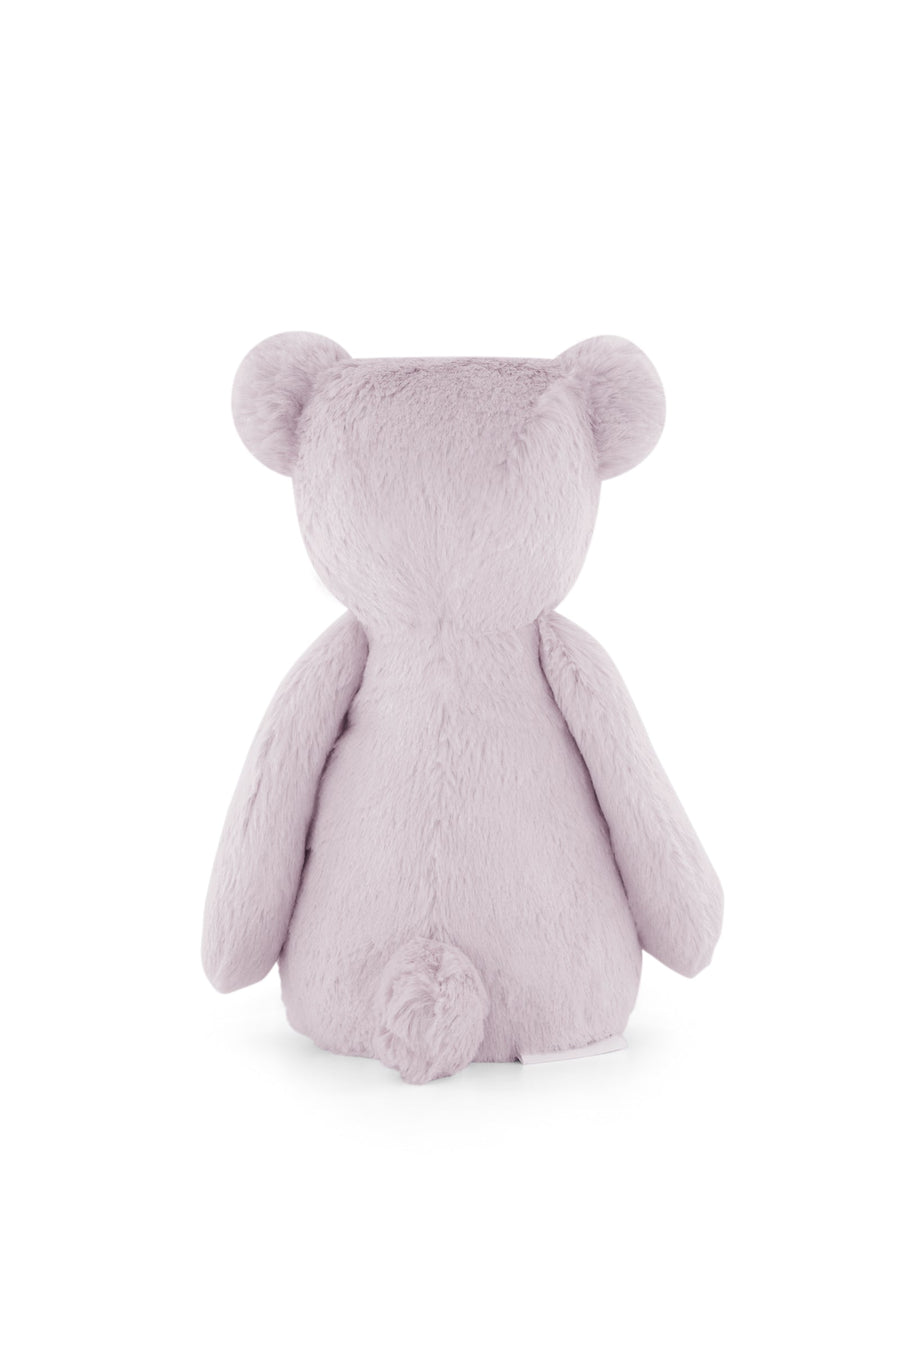 Snuggle Bunnies - George the Bear - Violet Childrens Toy from Jamie Kay NZ